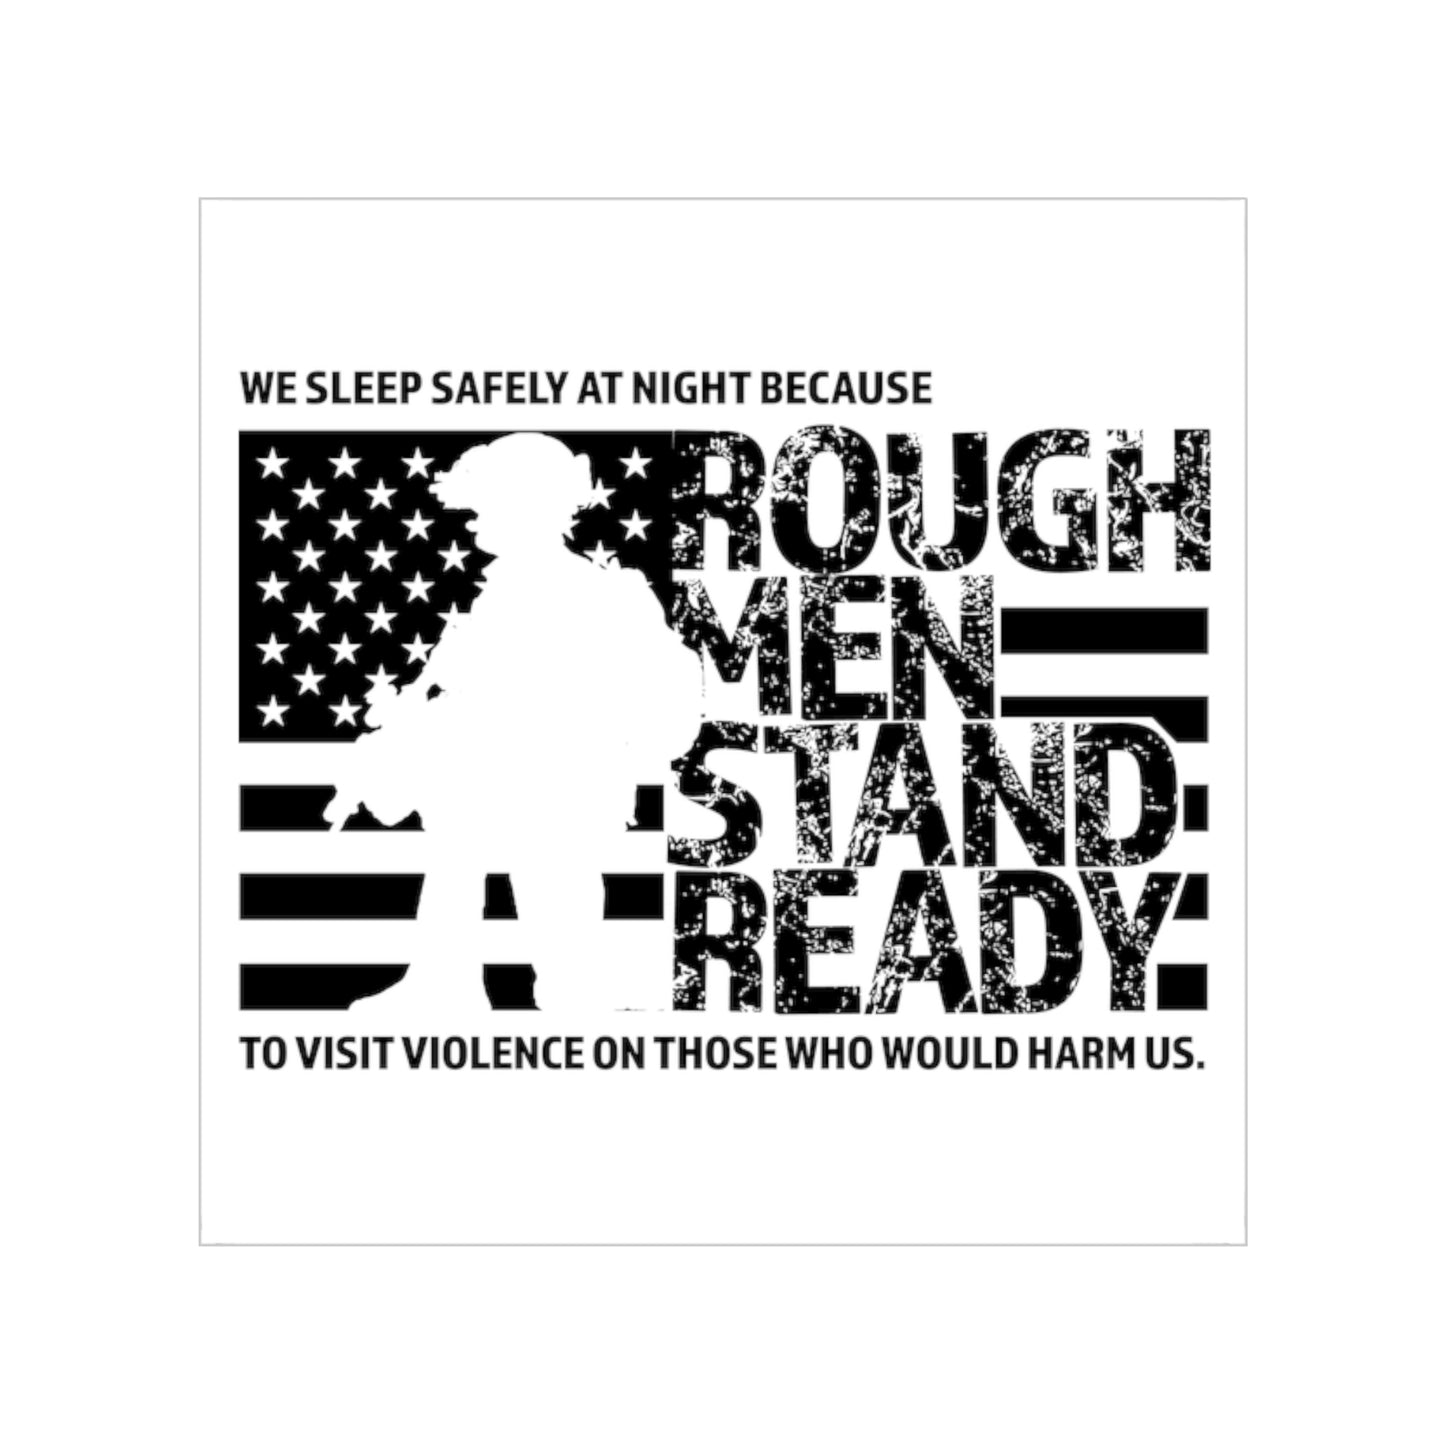 Rough Men Stand Ready Transparent Outdoor Stickers, Square, 1pc